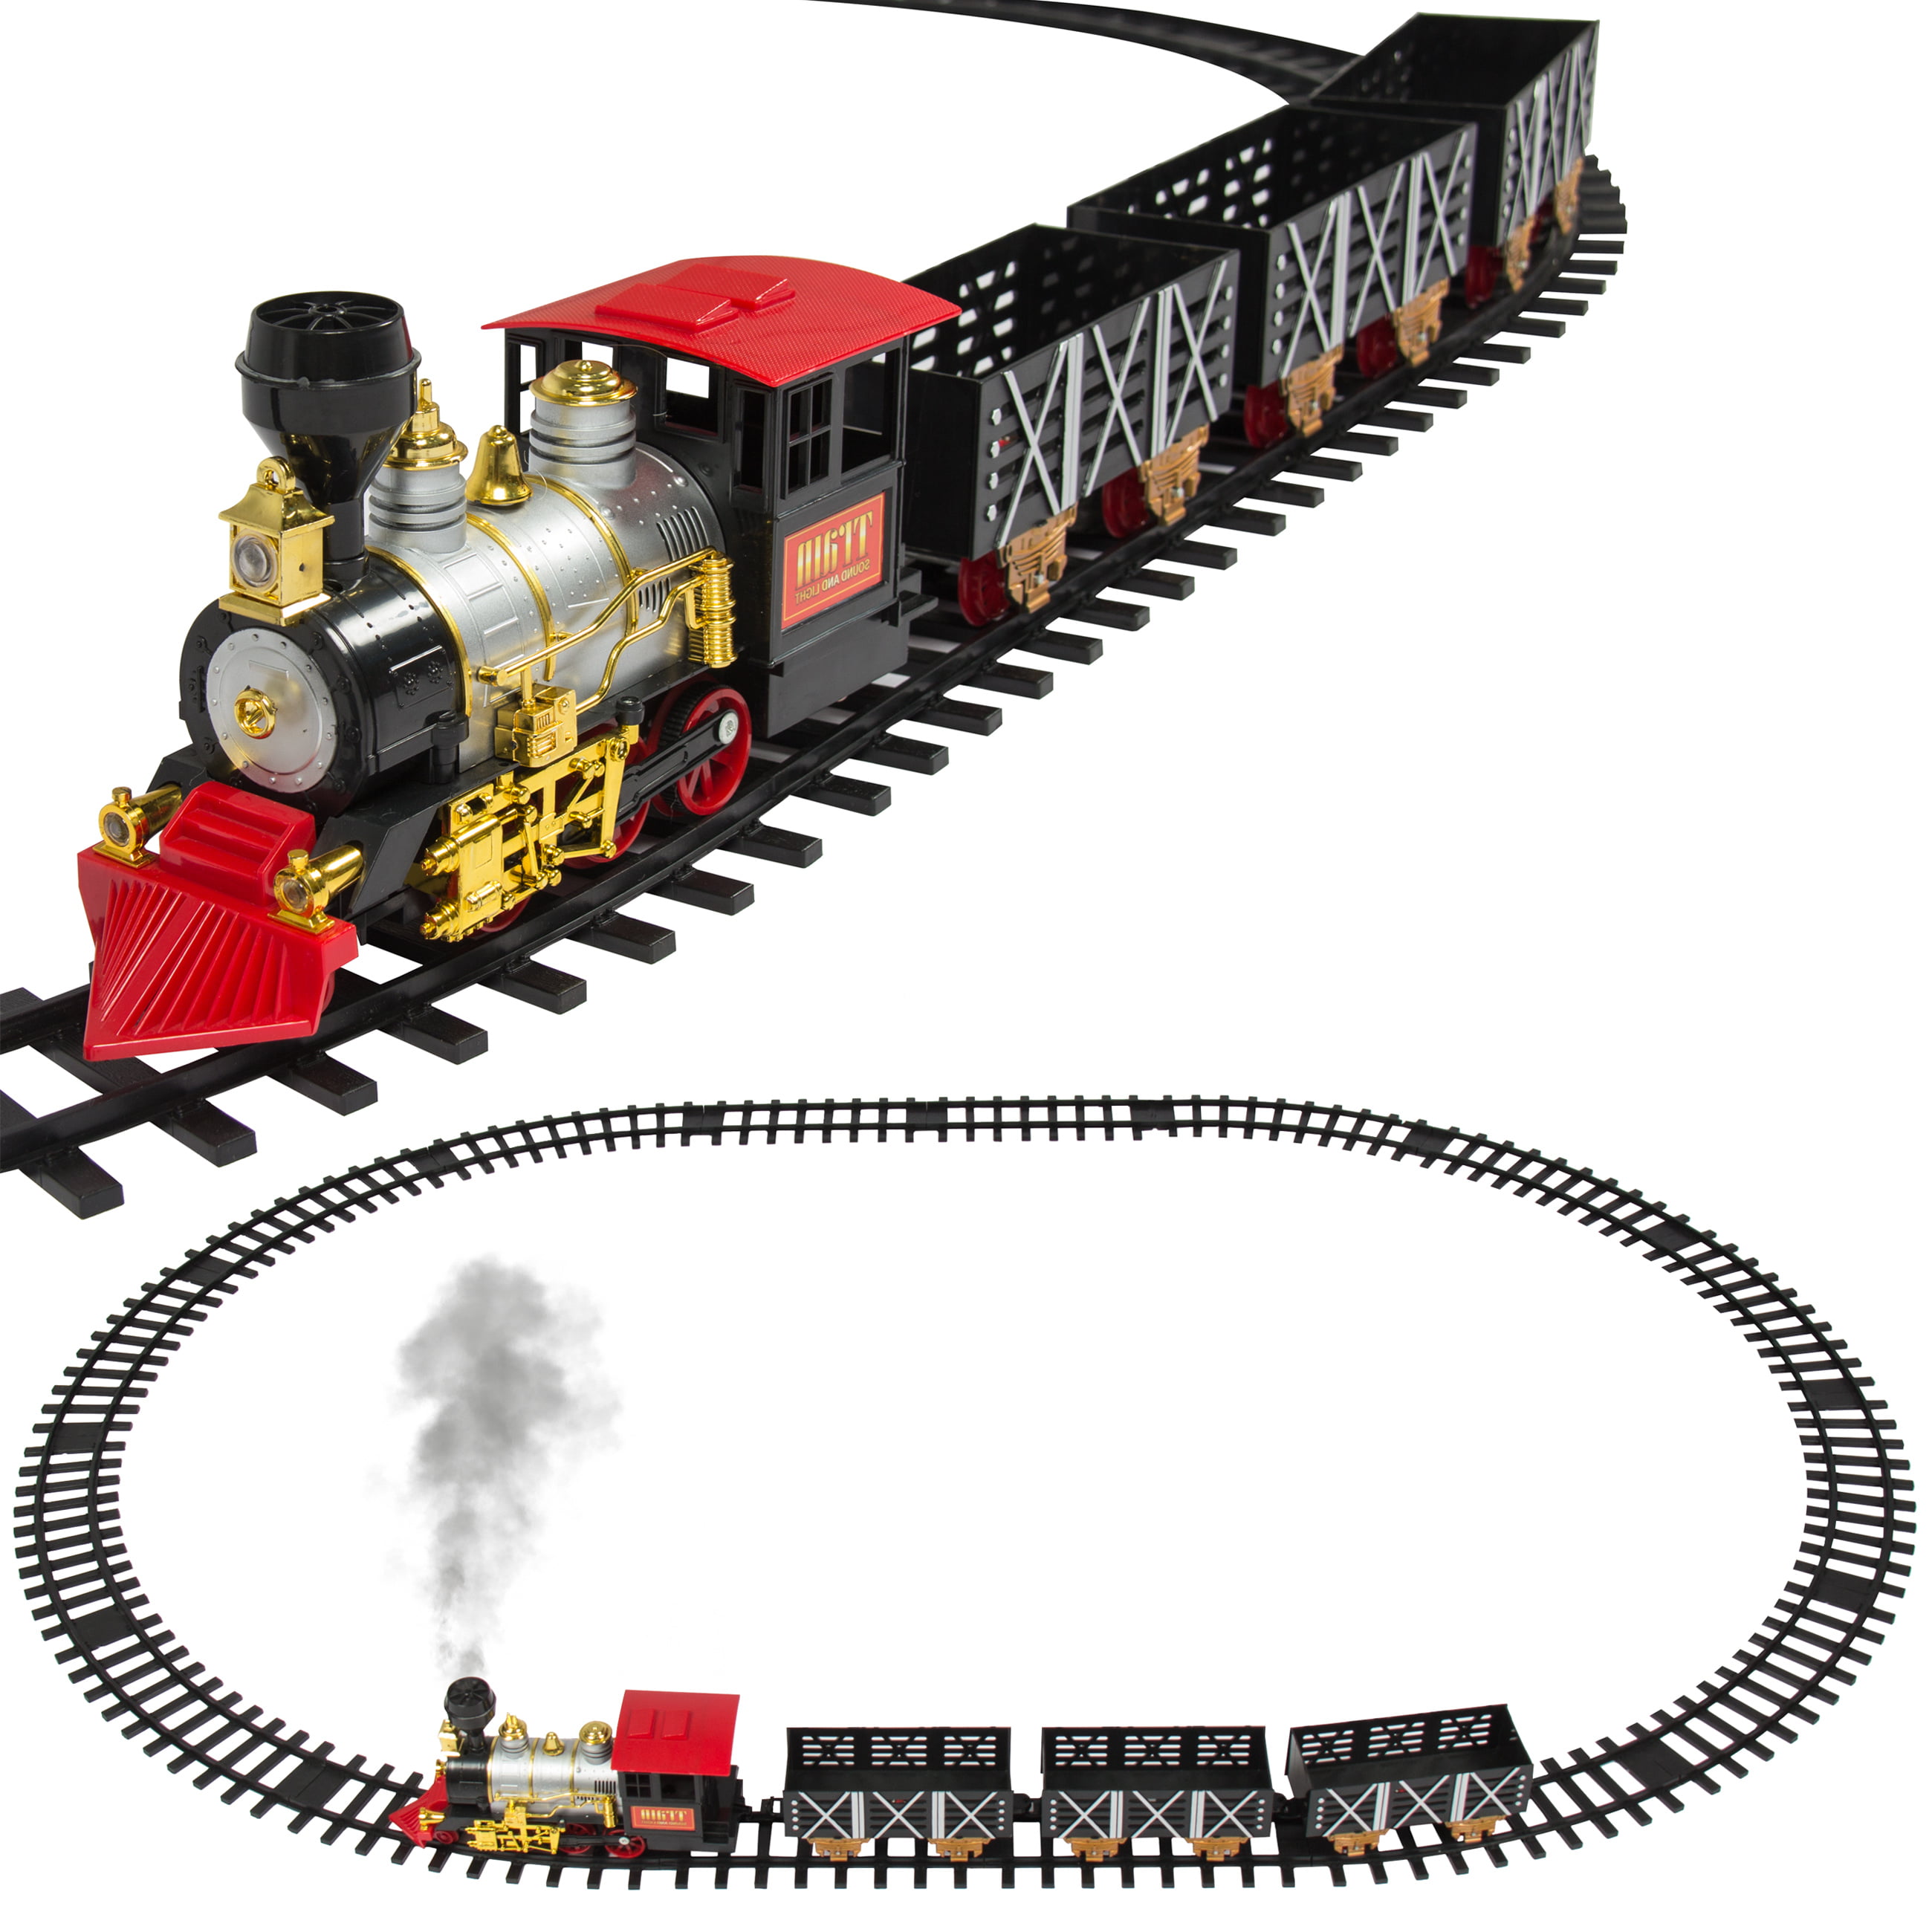 Kids Classic Battery Operated Train Set Toy With Tracks Light Engine Carriages 